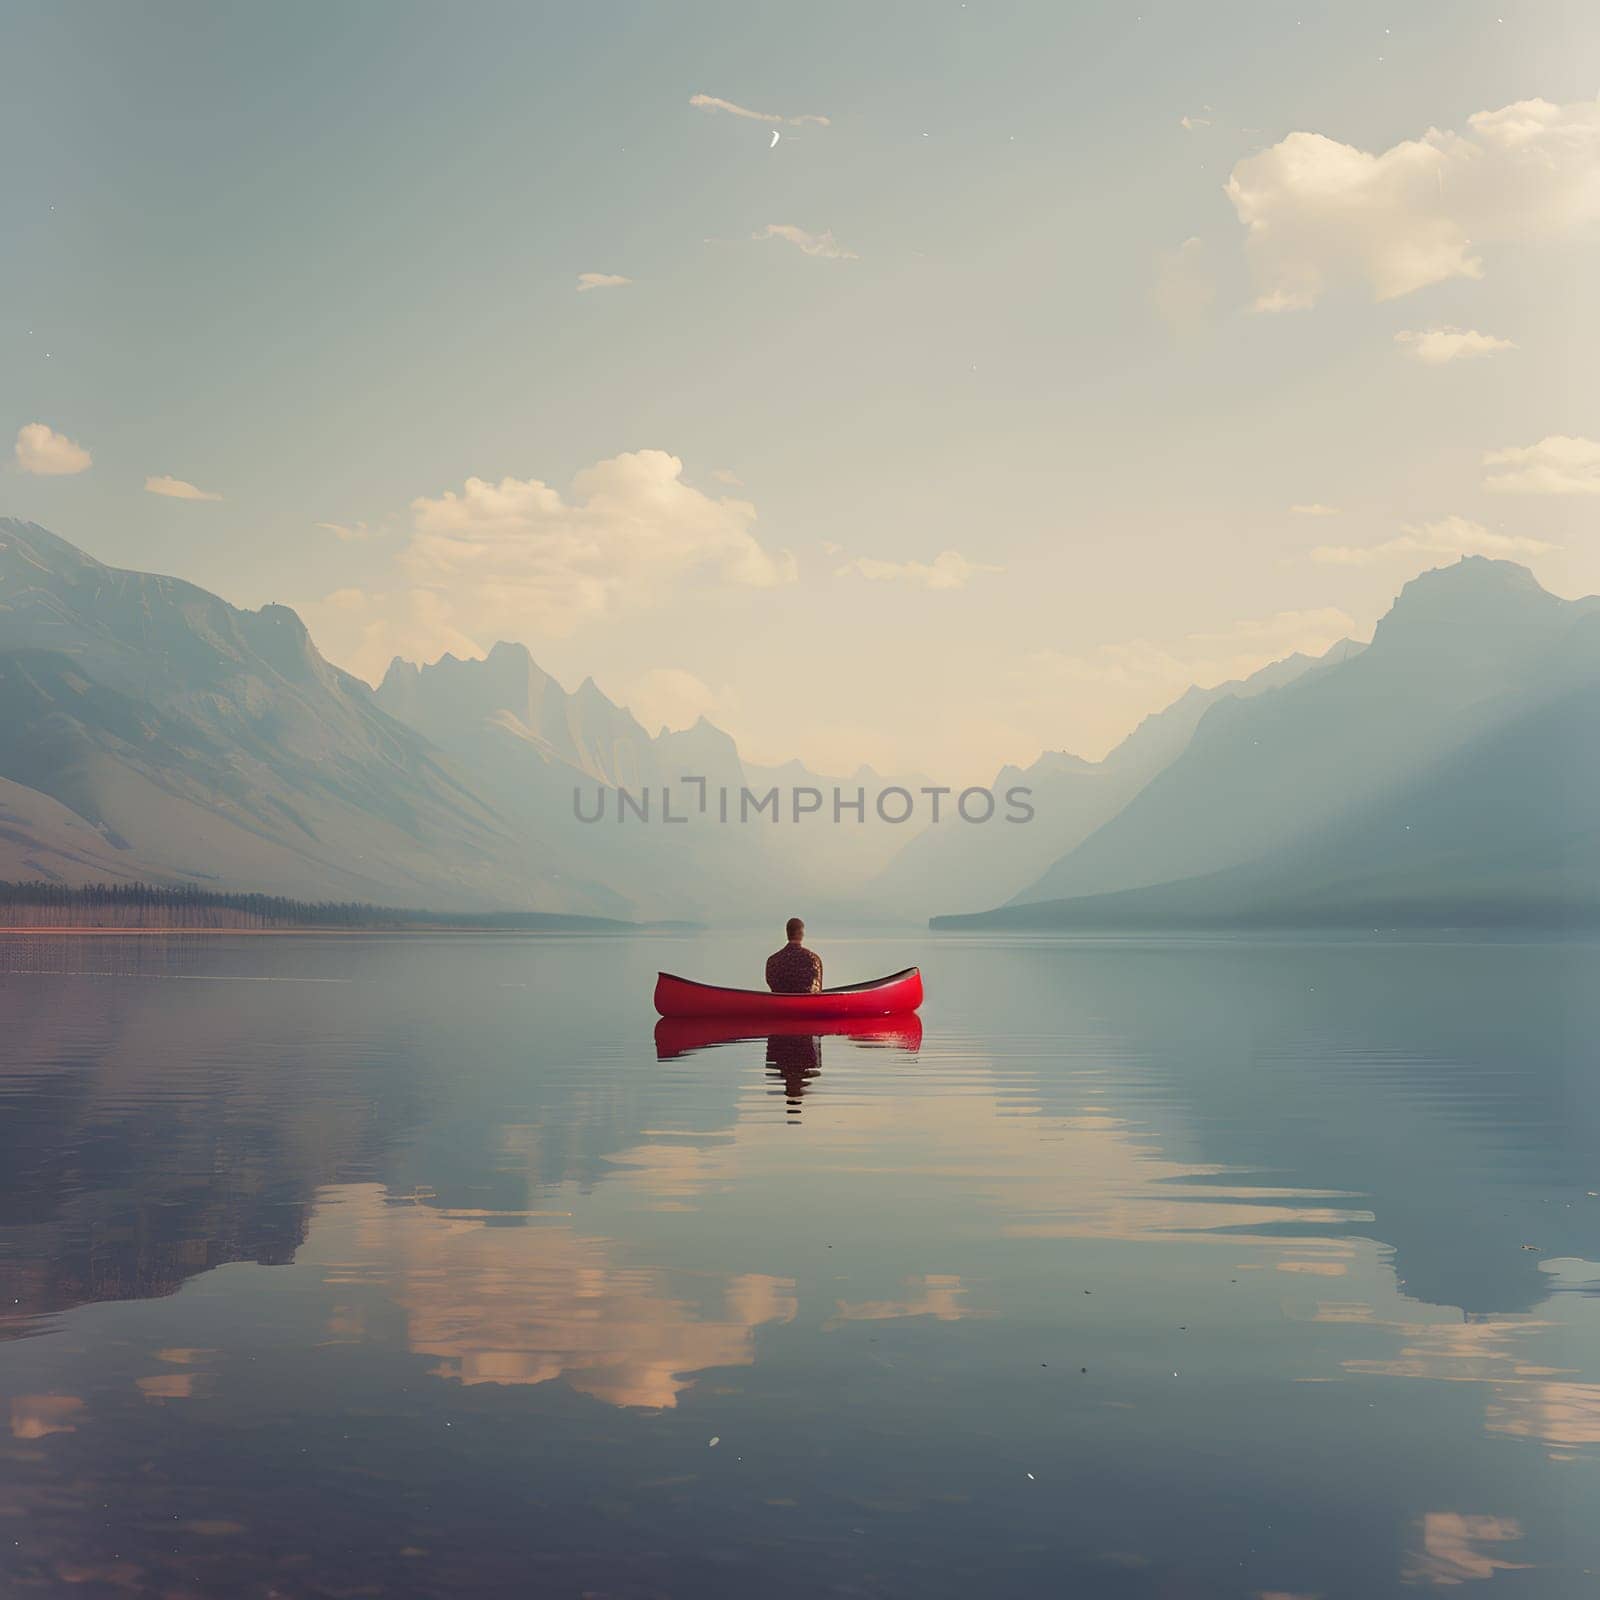 A person is enjoying outdoor recreation in a red canoe on a serene lake with majestic mountains in the background under a cloudy sky